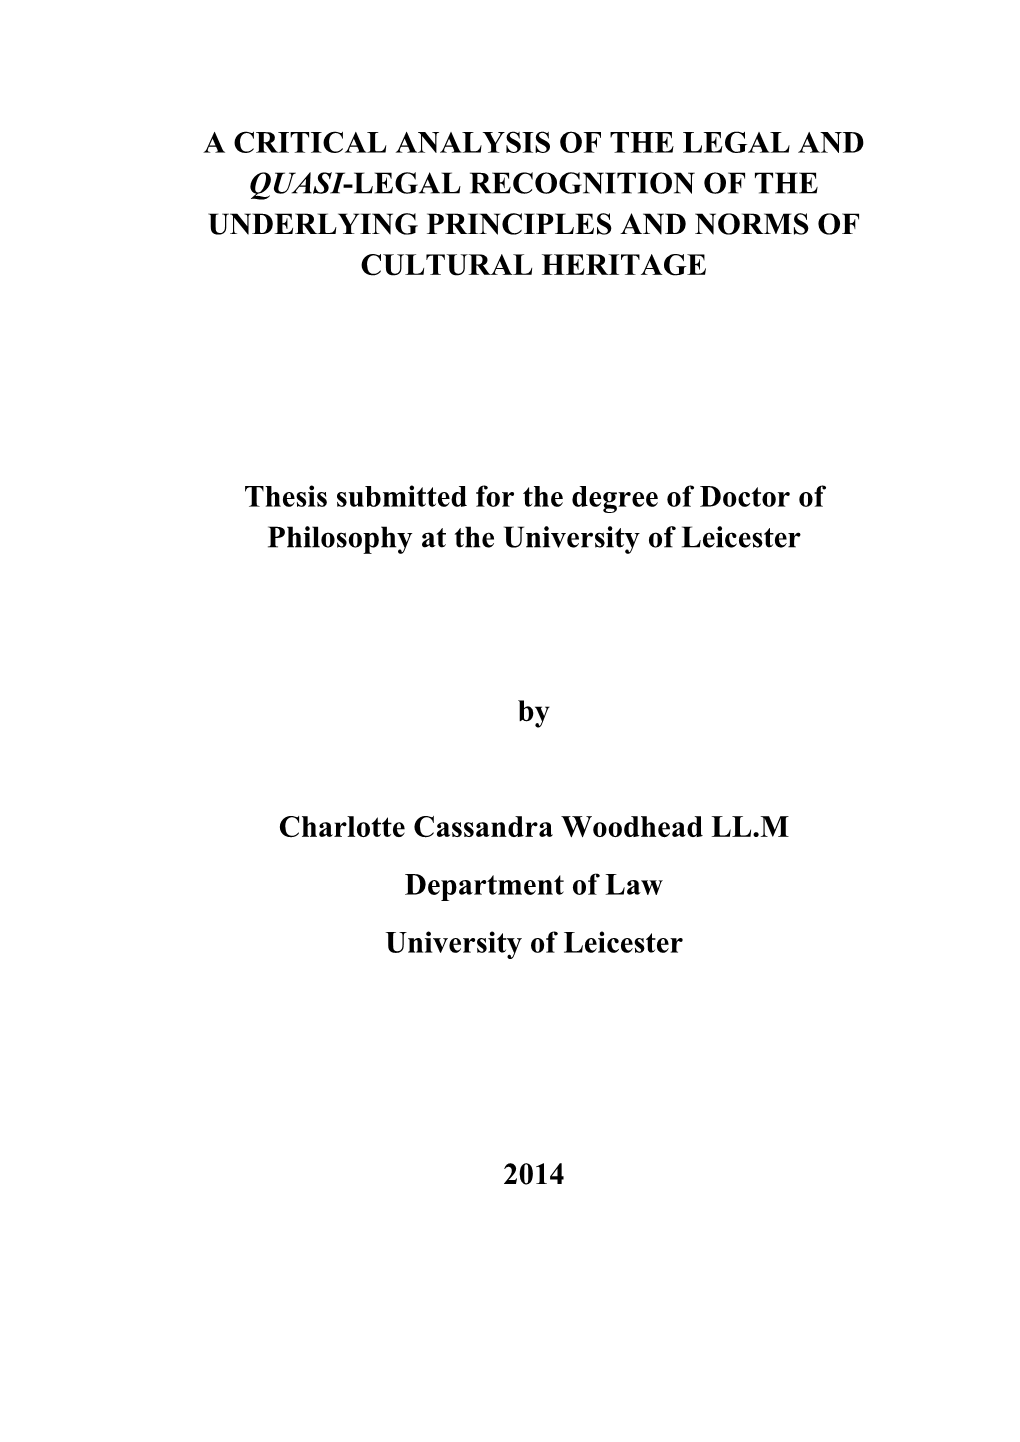 A Critical Analysis of the Legal and Quasi-Legal Recognition of the Underlying Principles and Norms of Cultural Heritage